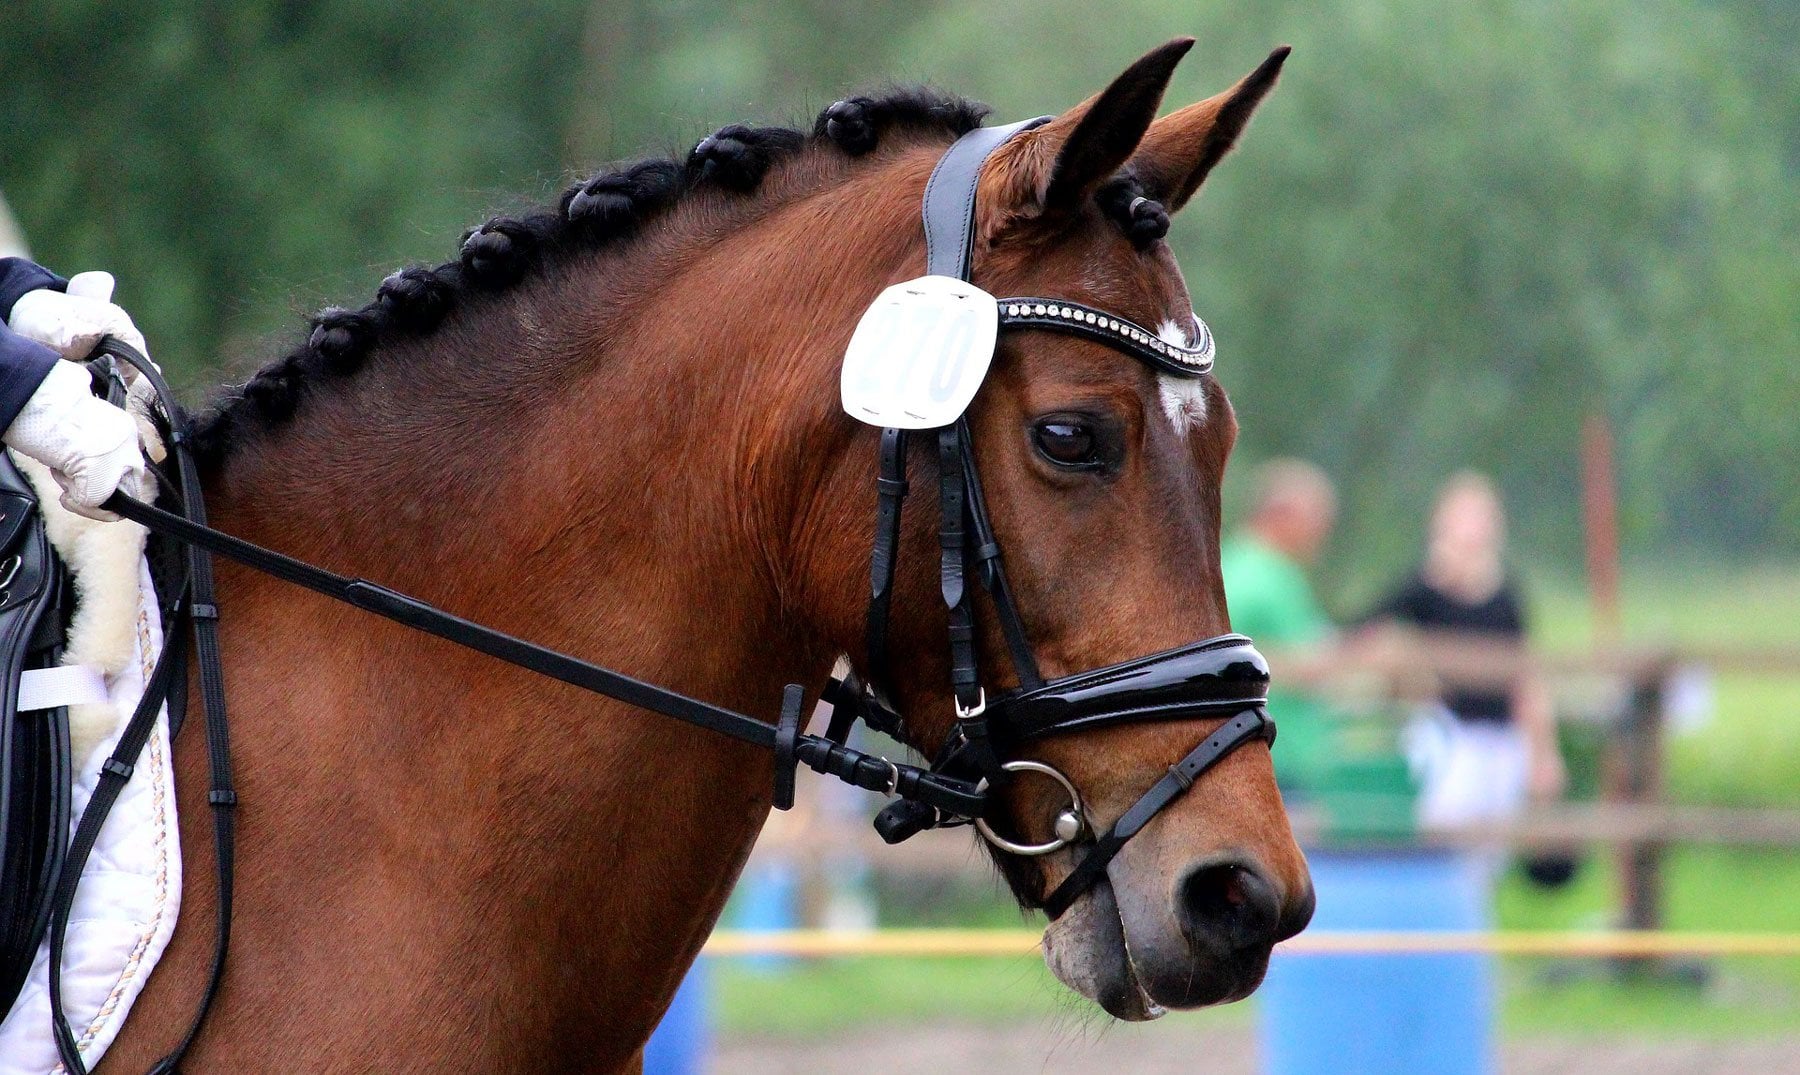 A guide to Dressage for Beginners